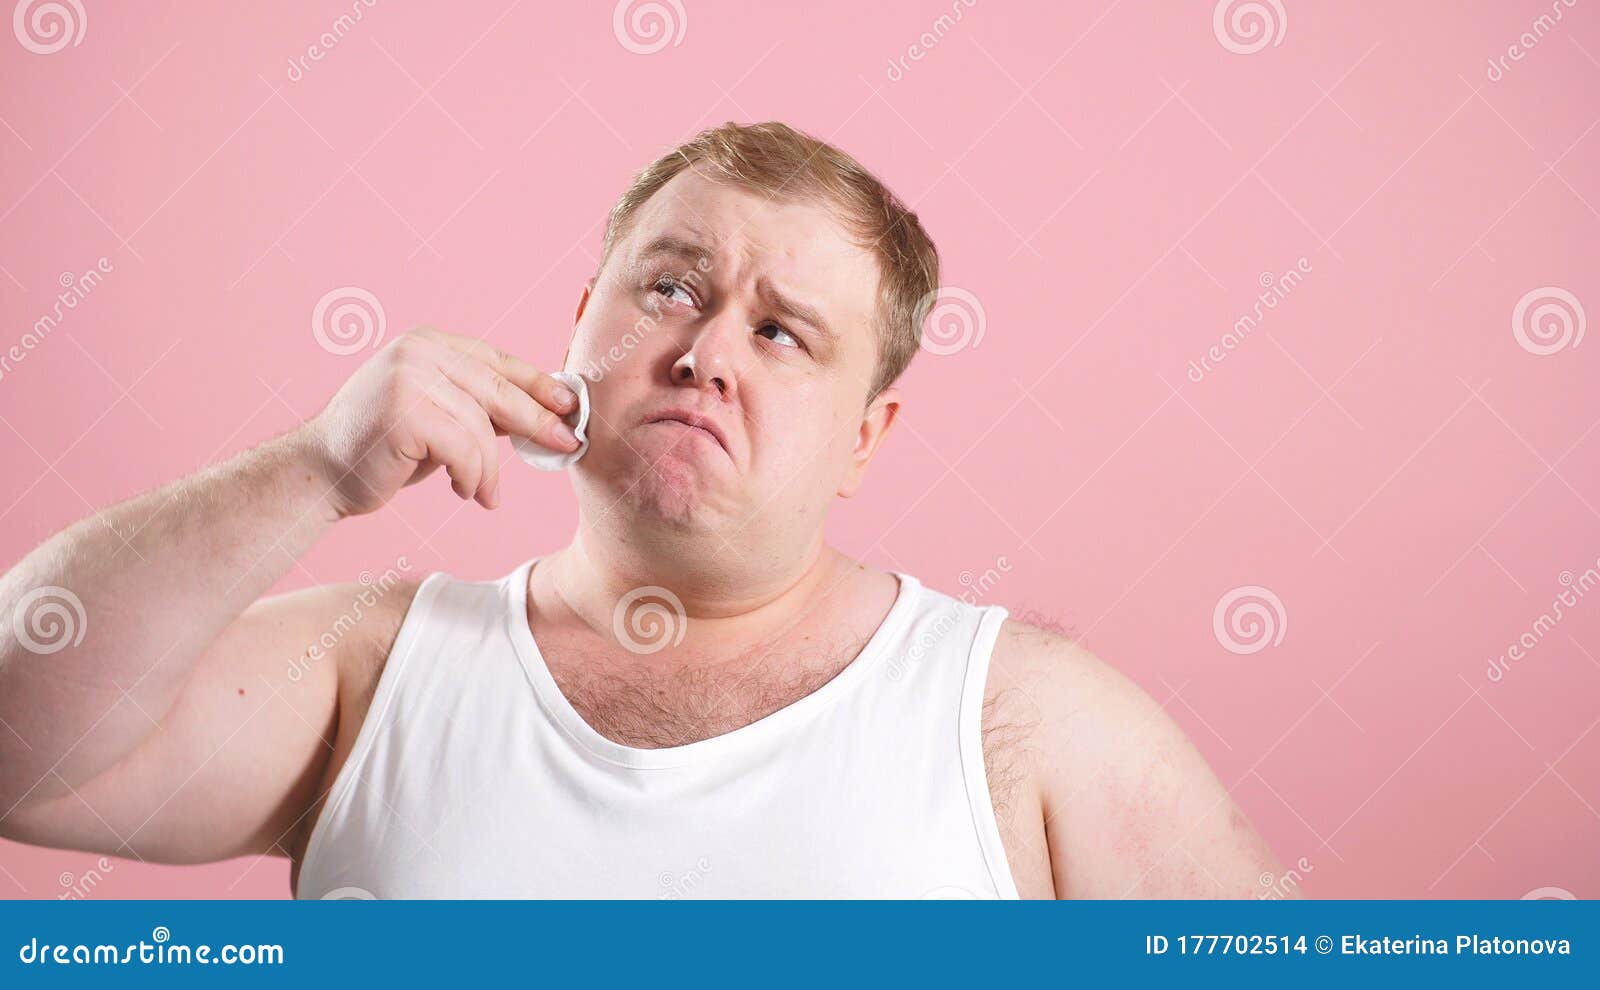 Funny Fat Man In A Tshirt Wipes His Face With A Cotton Pad On An